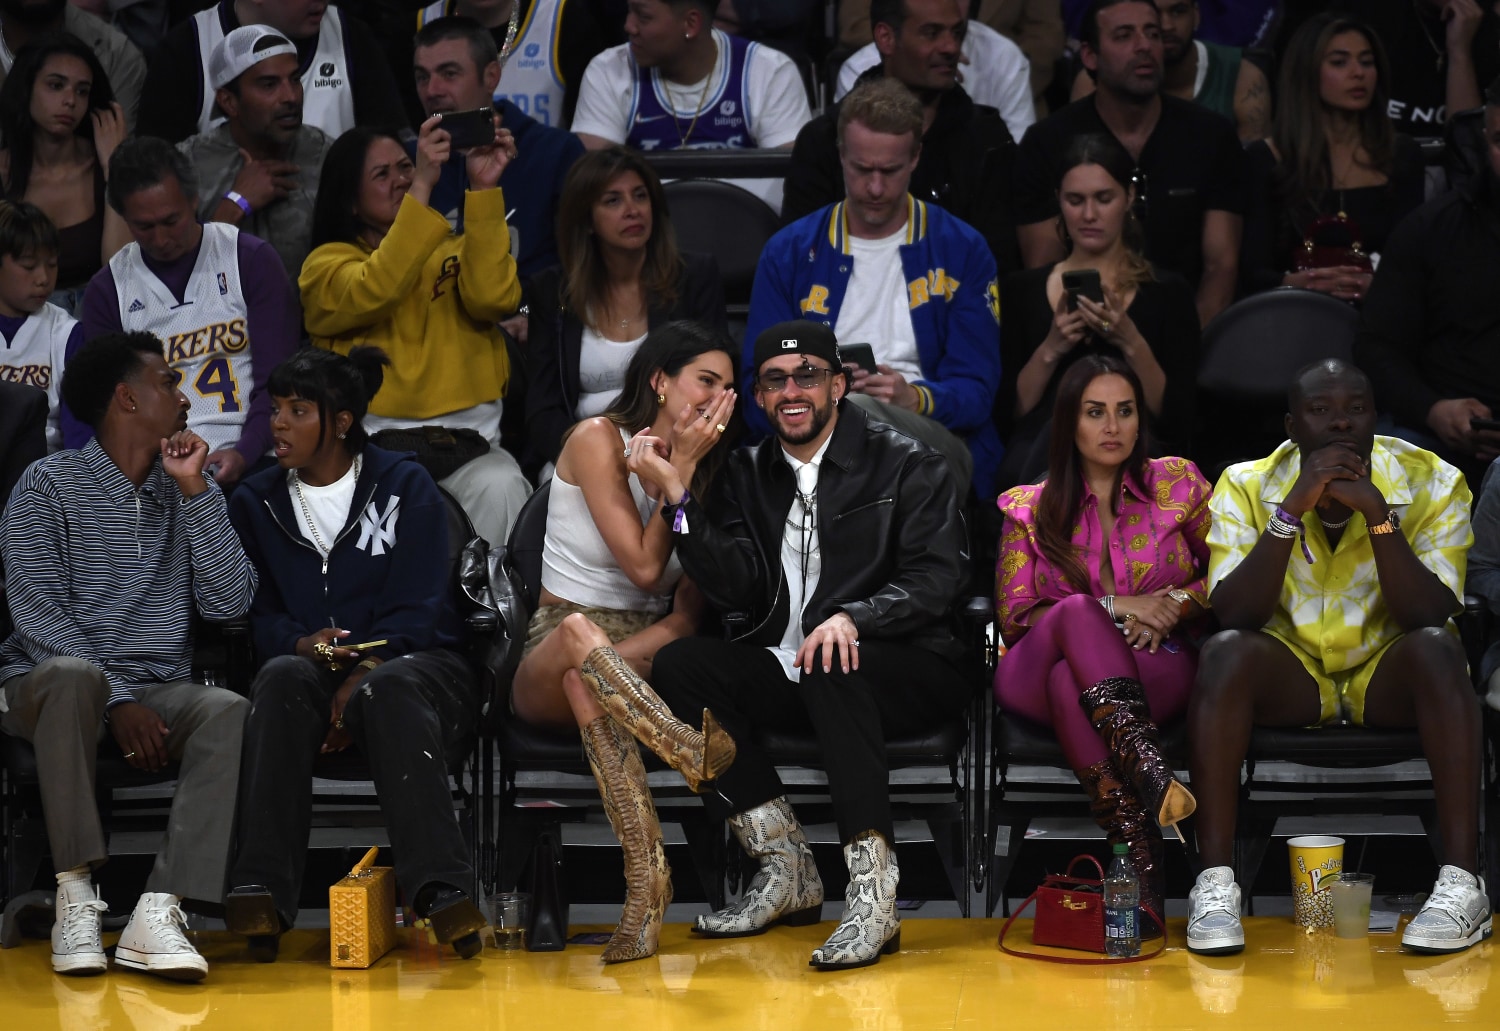 Bad Bunny and Eladio Carrion go to the Lakers game